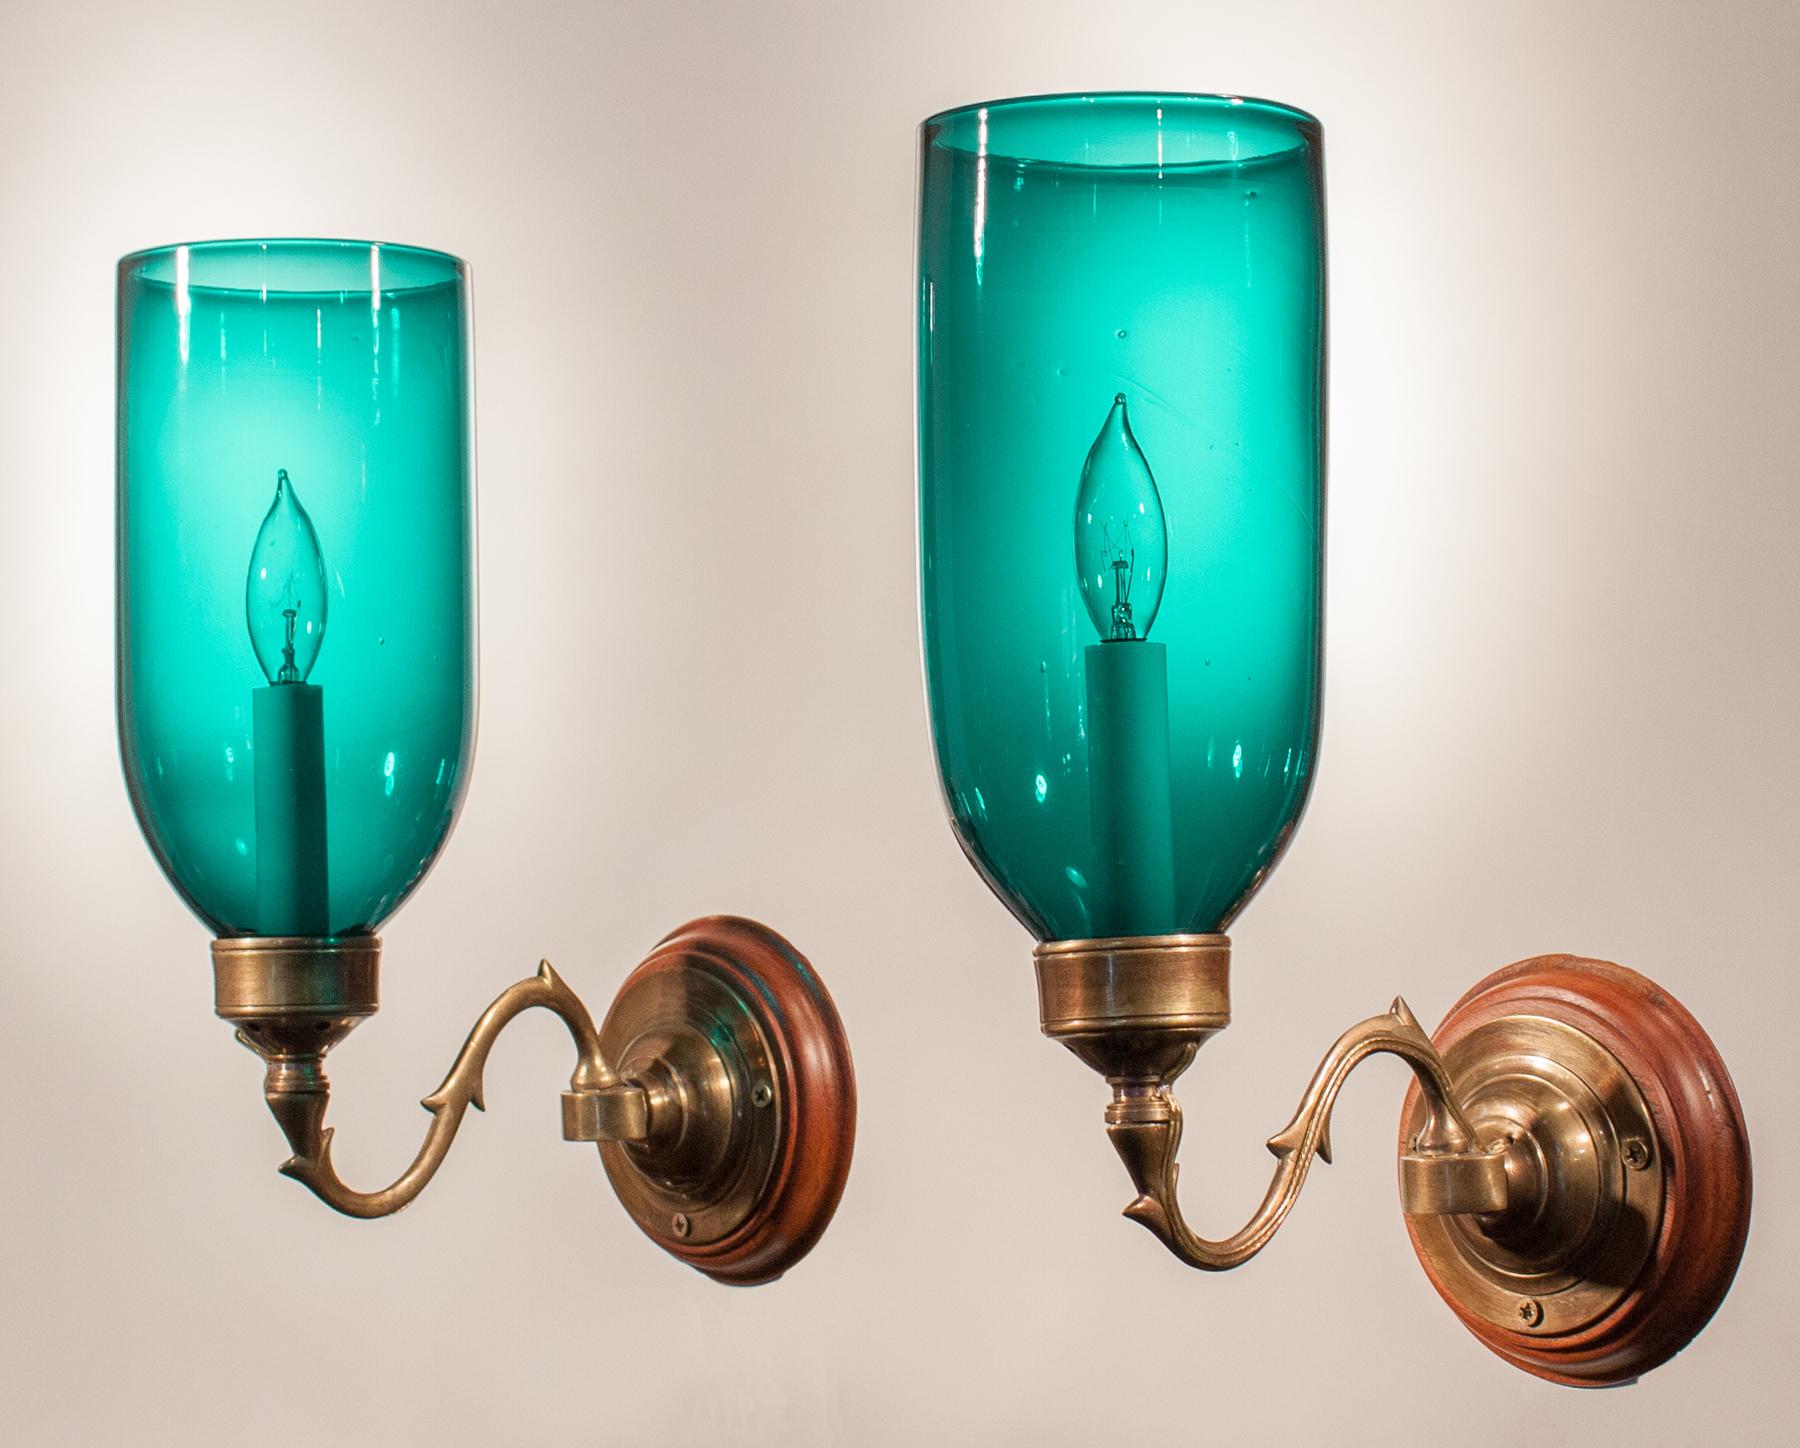 An exceptional pair of English hurricane shade sconces, circa 1860, with a teal green-blue hue. These authentic shades have desirable swirls in the handblown glass that speak to their quality and age. The wall sconces are newly electrified, each